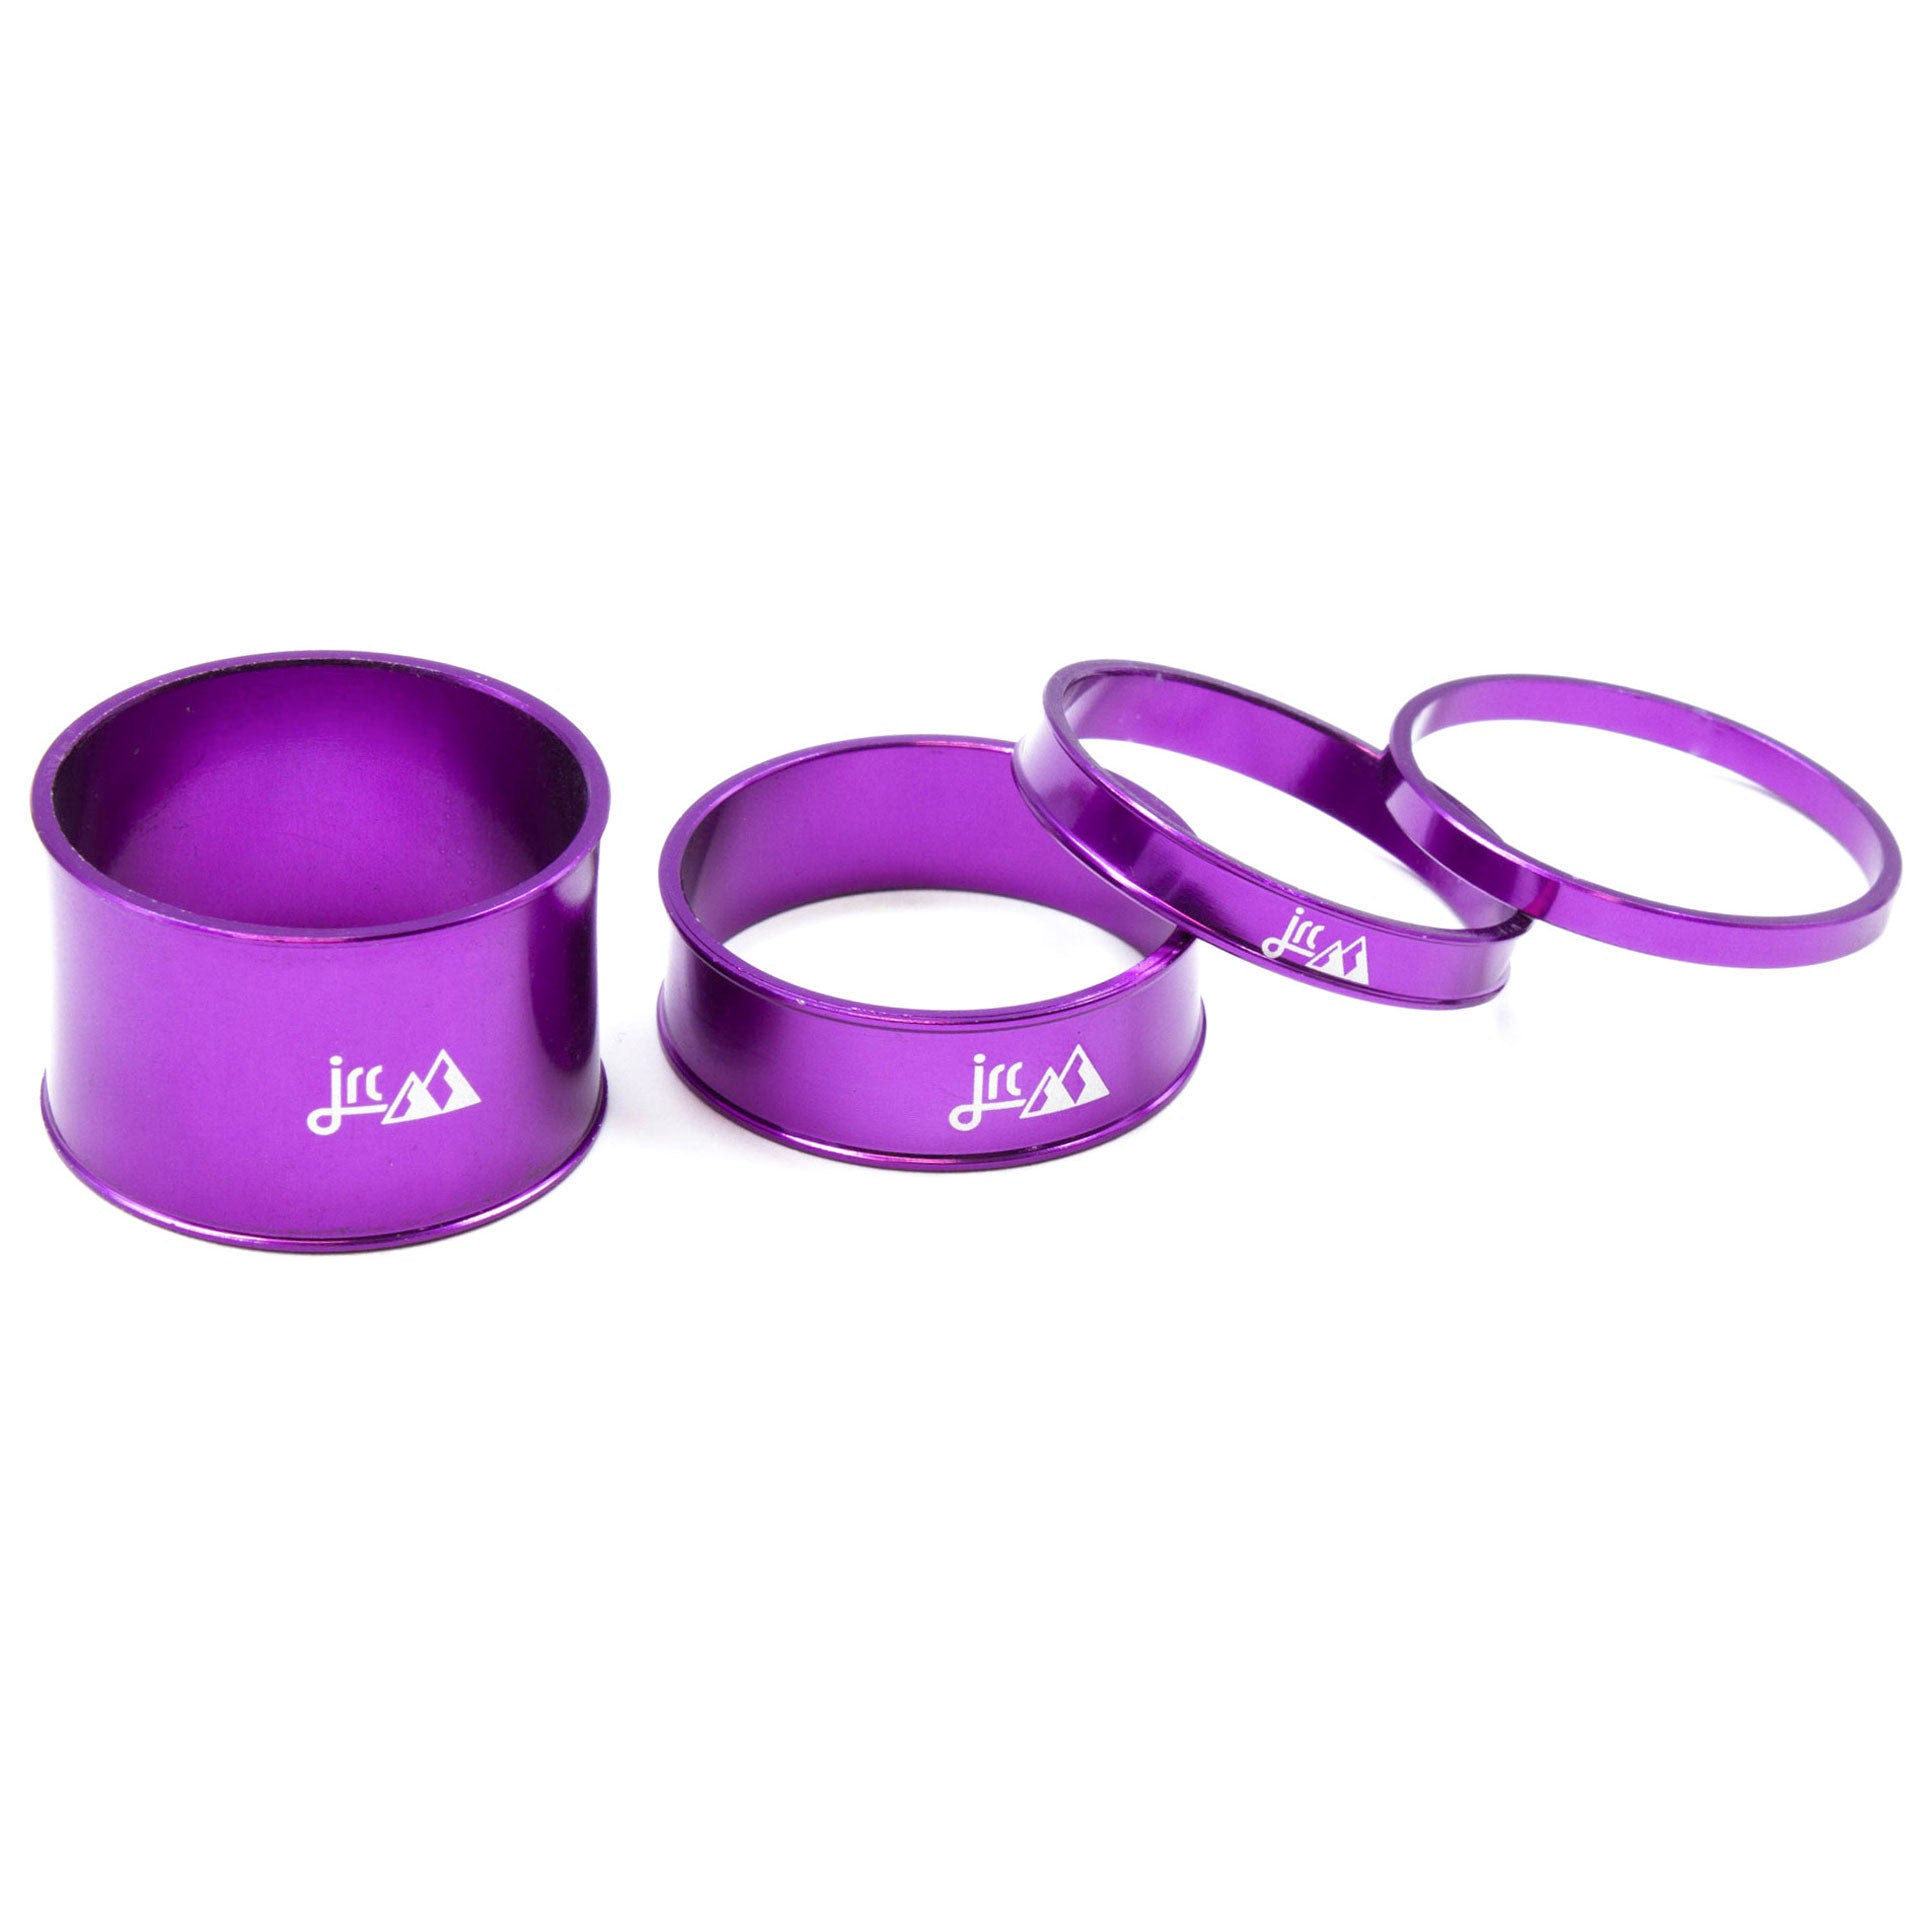 Purple, lightweight aluminium bicycle headset spacer kit with 4 sizes.